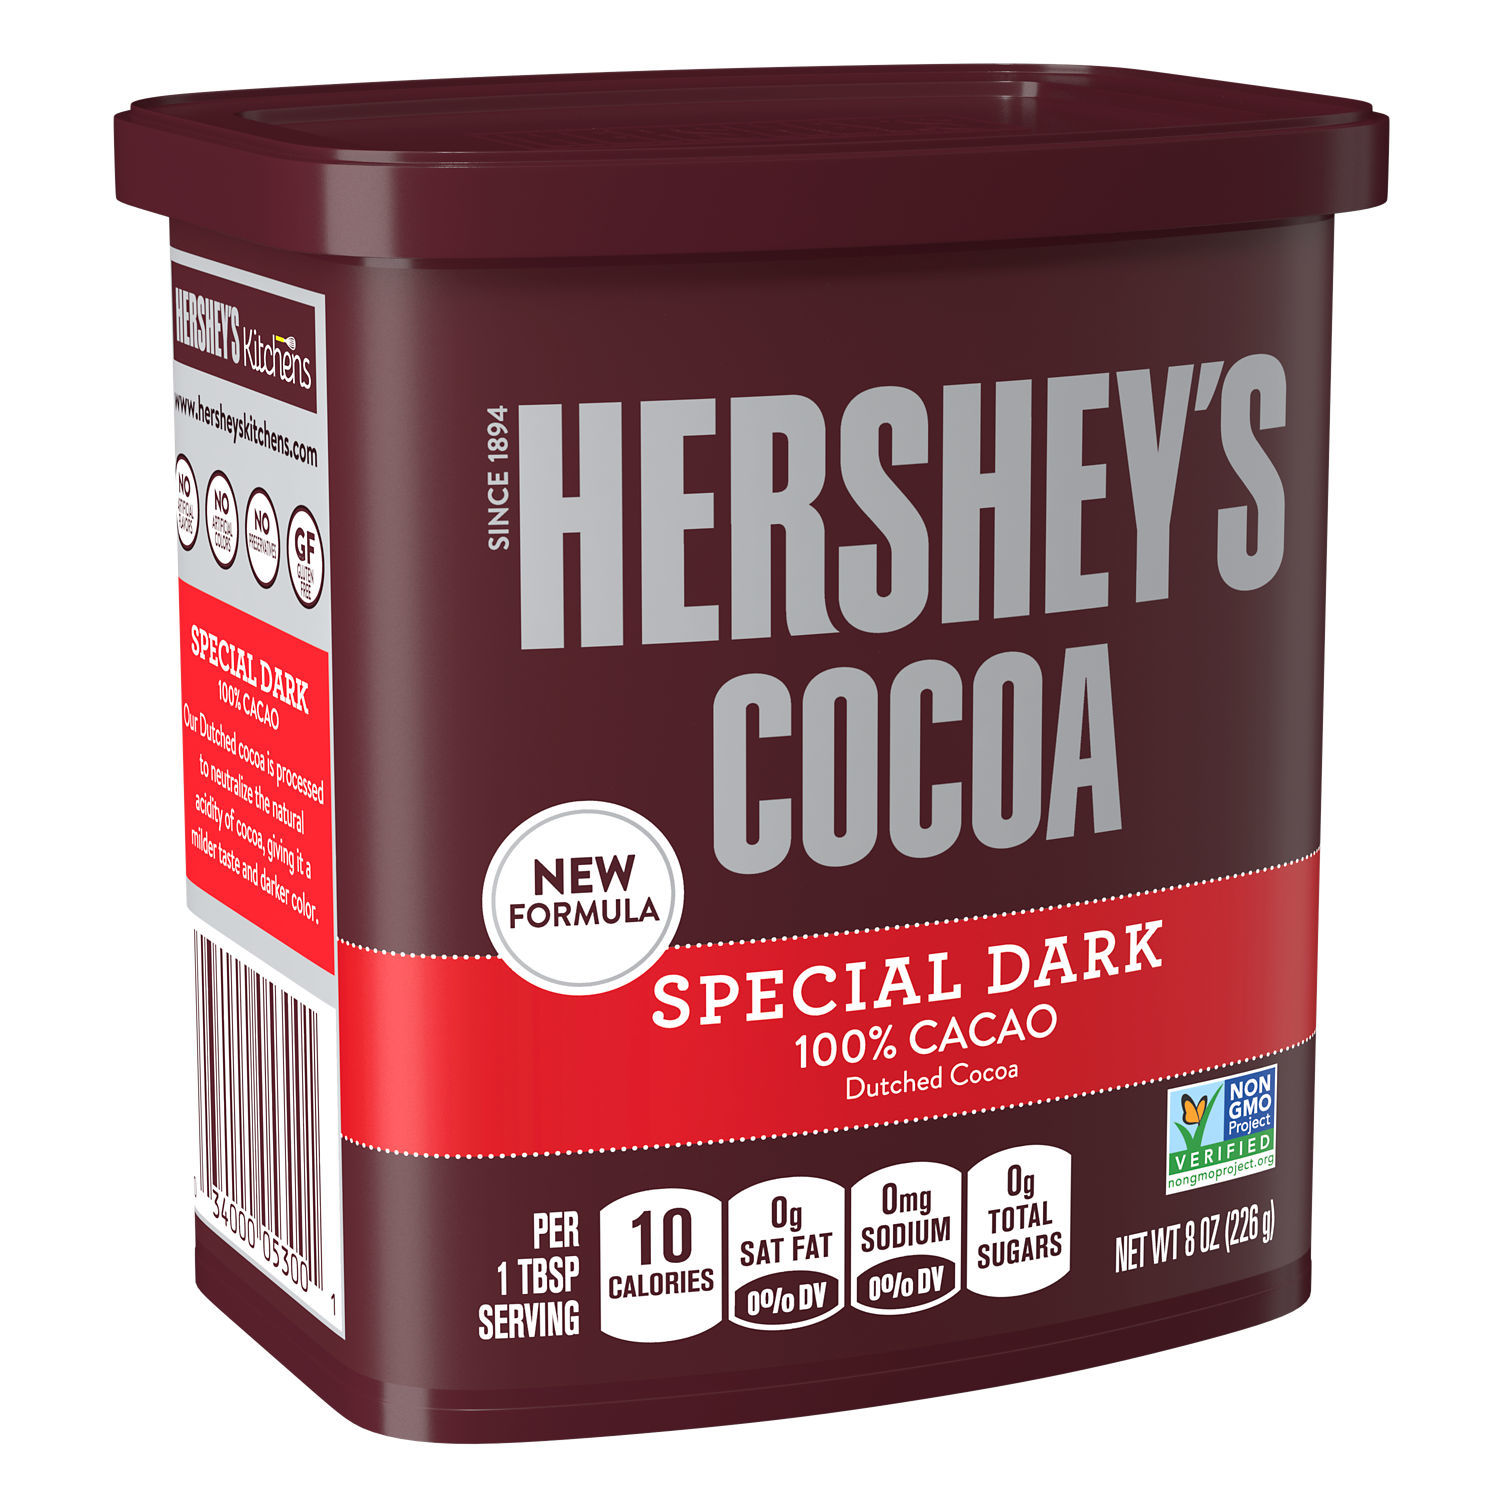 Hershey's Special Dark Dutched Cocoa Powder, Can 8 oz - image 2 of 9